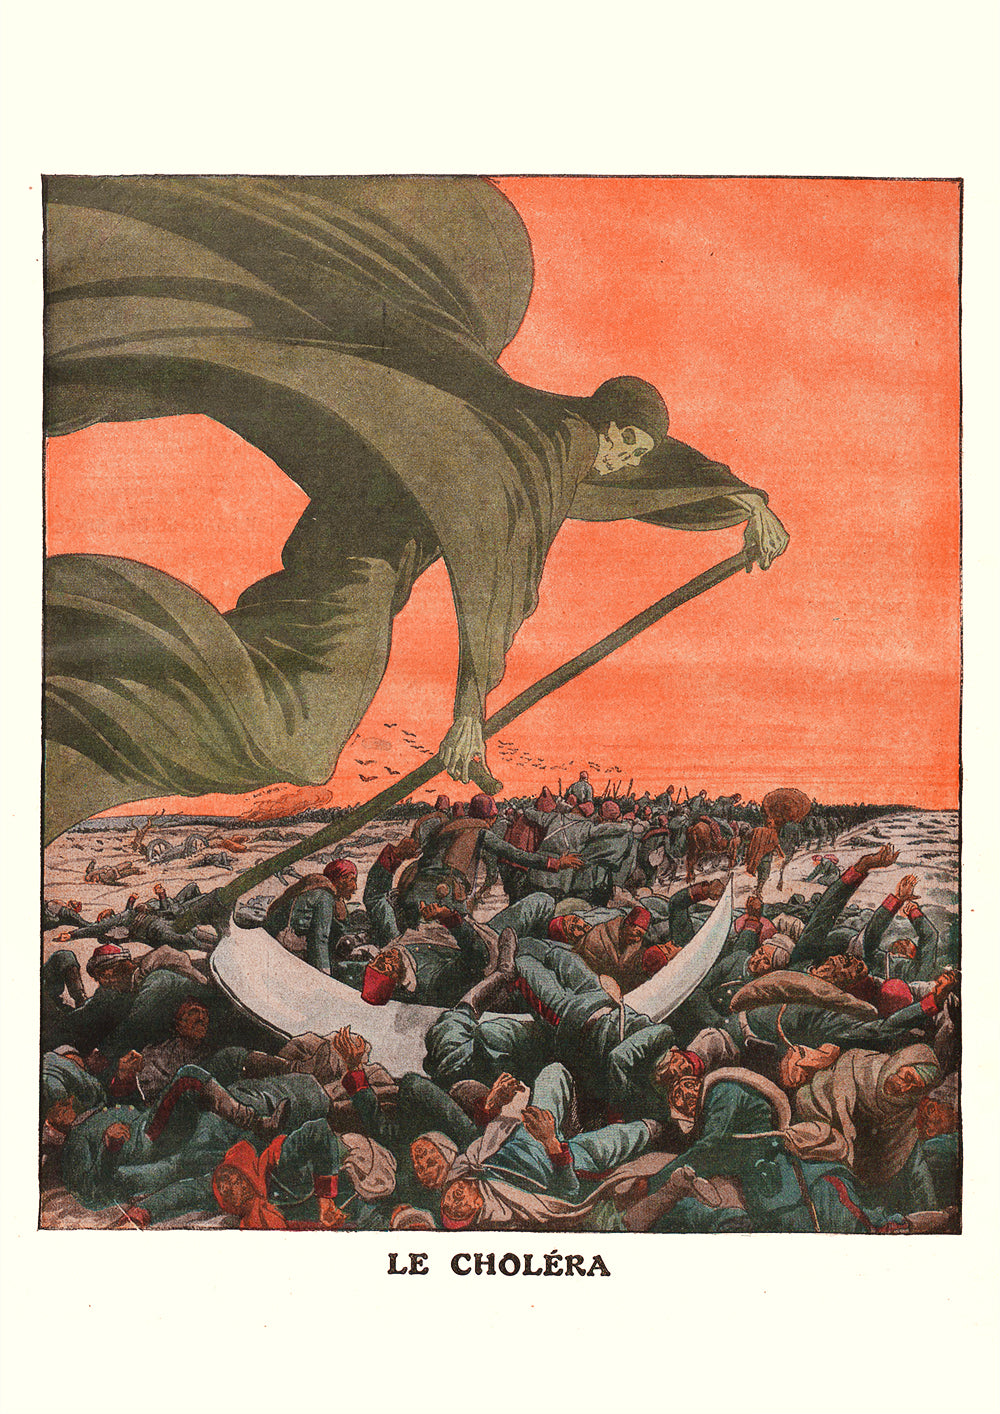 Cholera – French newspaper cover